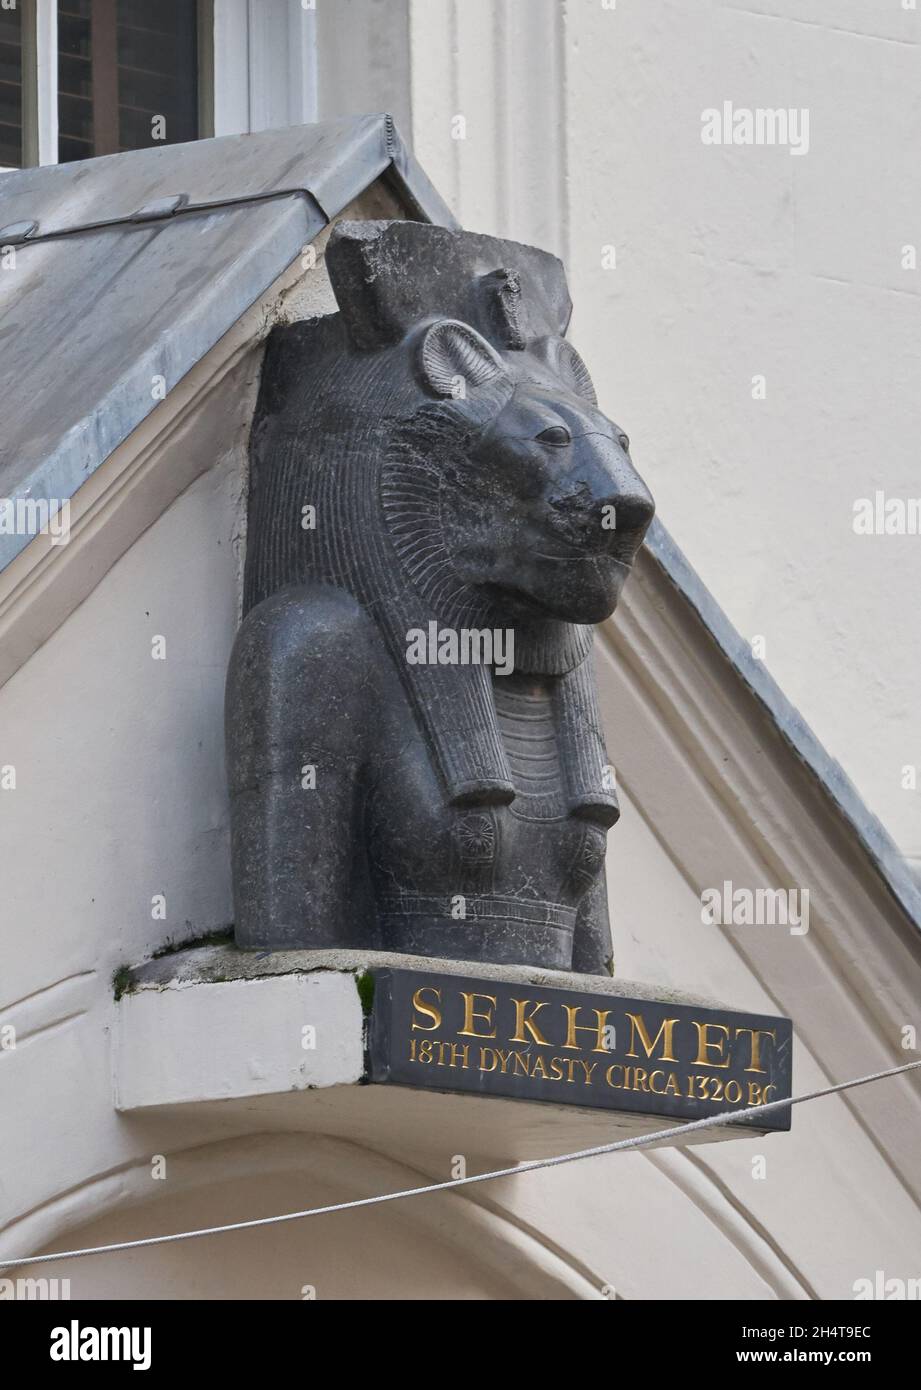 bust statue of sekmet outside sothebys auction house Stock Photo